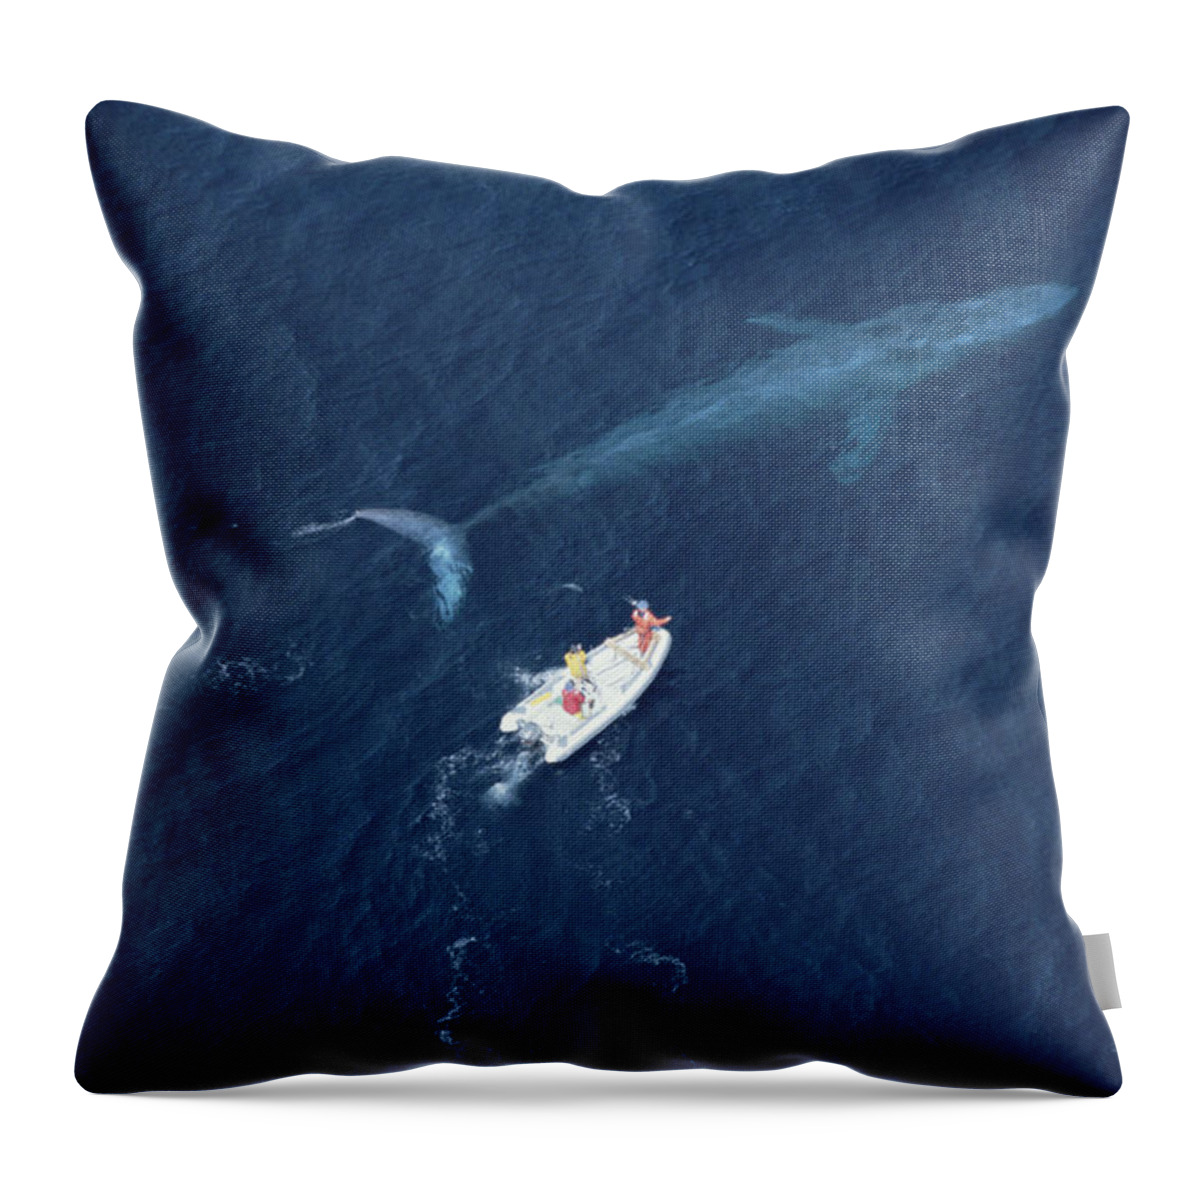 00045067 Throw Pillow featuring the photograph Blue Whale With Research Boat Santa by Flip Nicklin